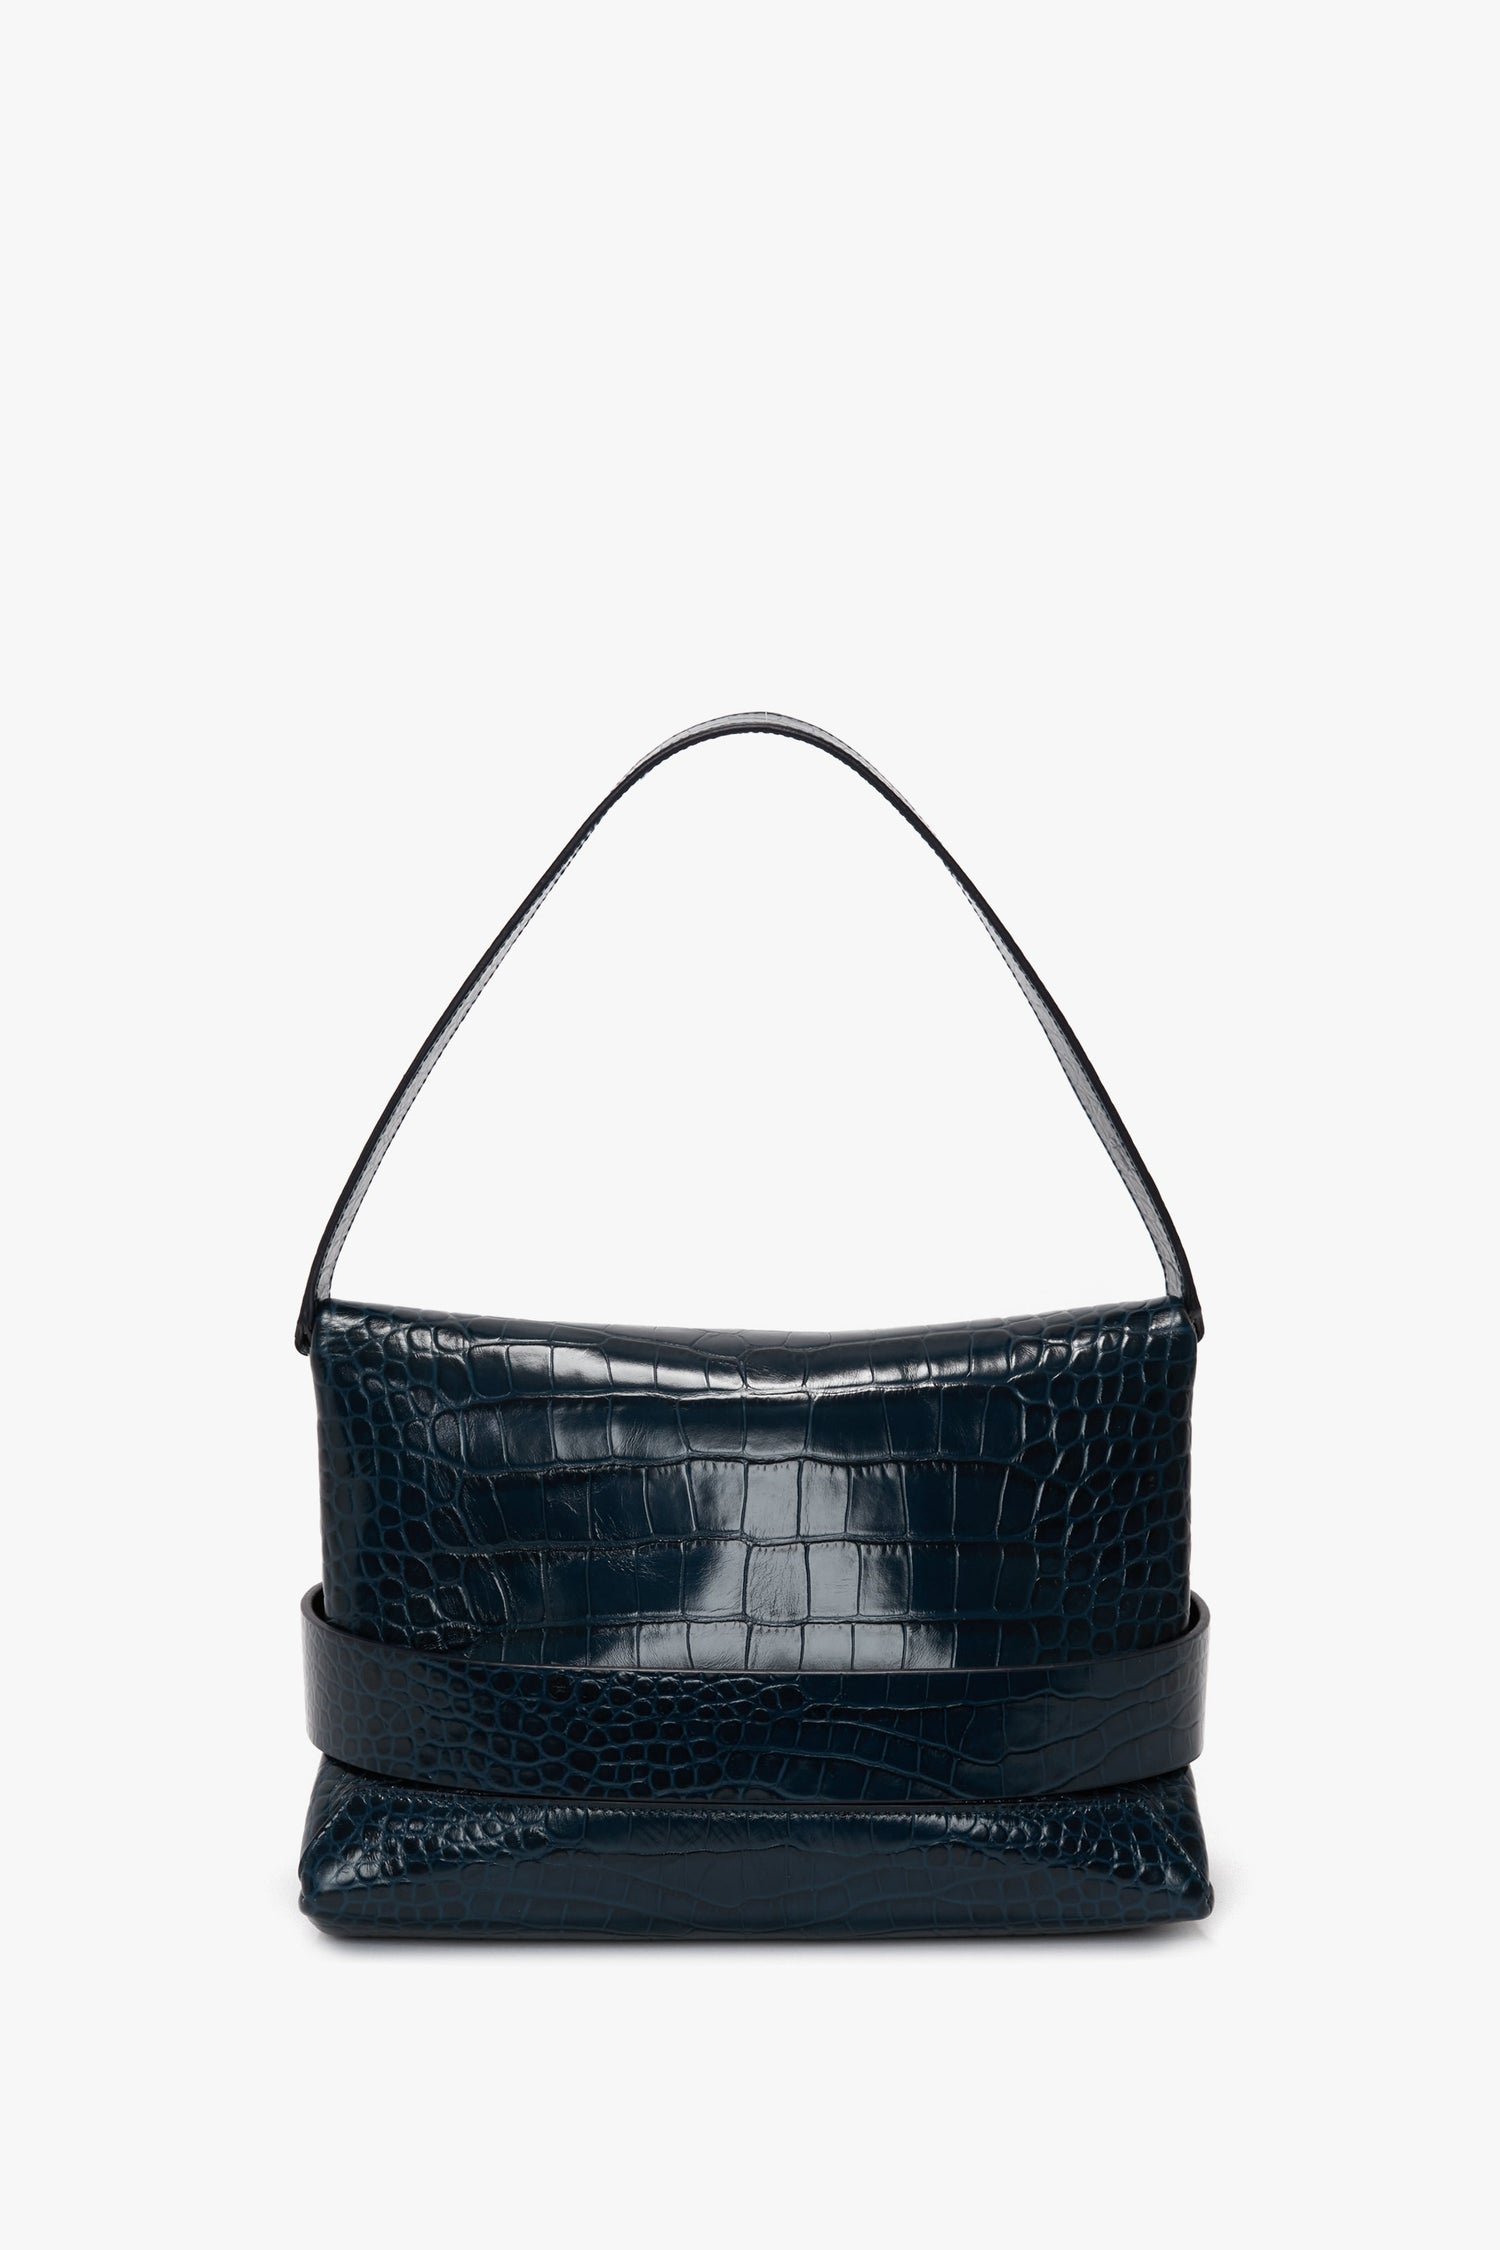 A black crocodile-patterned calf leather handbag with a single strap and a hint of Midnight Blue, displayed against a plain white background, is the B Pouch Bag In Croc Effect Midnight Blue Leather by Victoria Beckham.